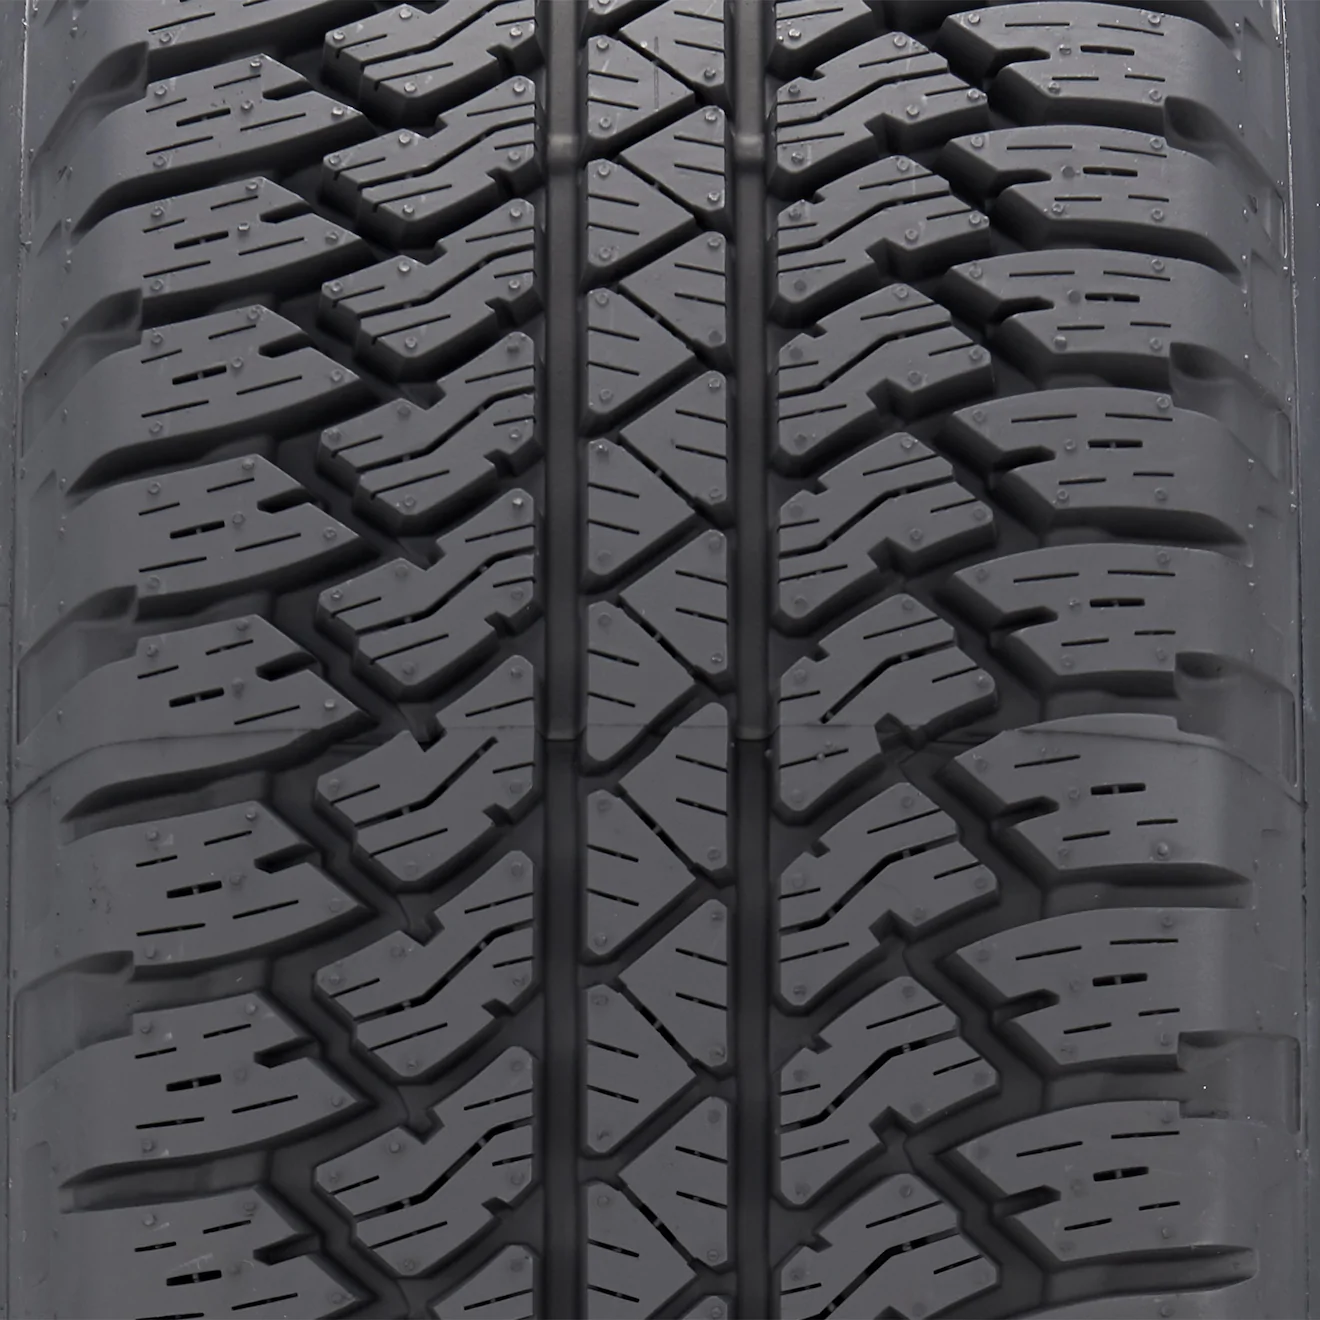 Ford Bronco BB vs BD tires - which is better for daily driver? 1614745300282